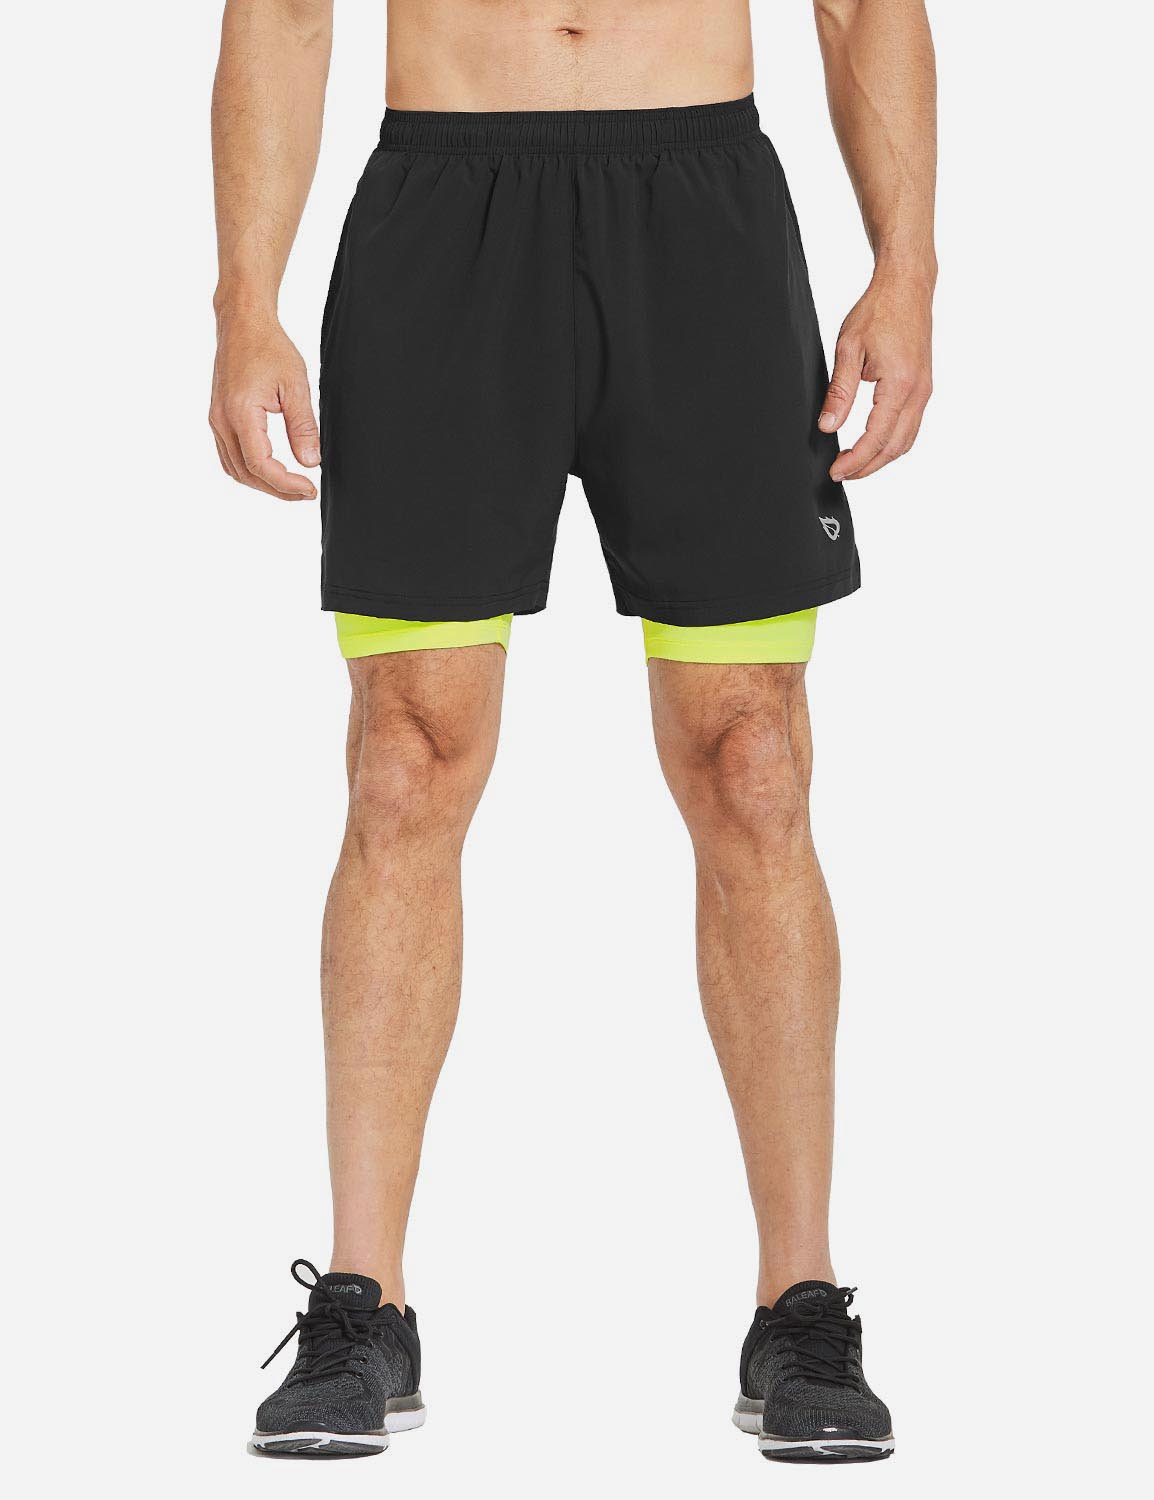 Laureate Compression 2-in-1 Shorts